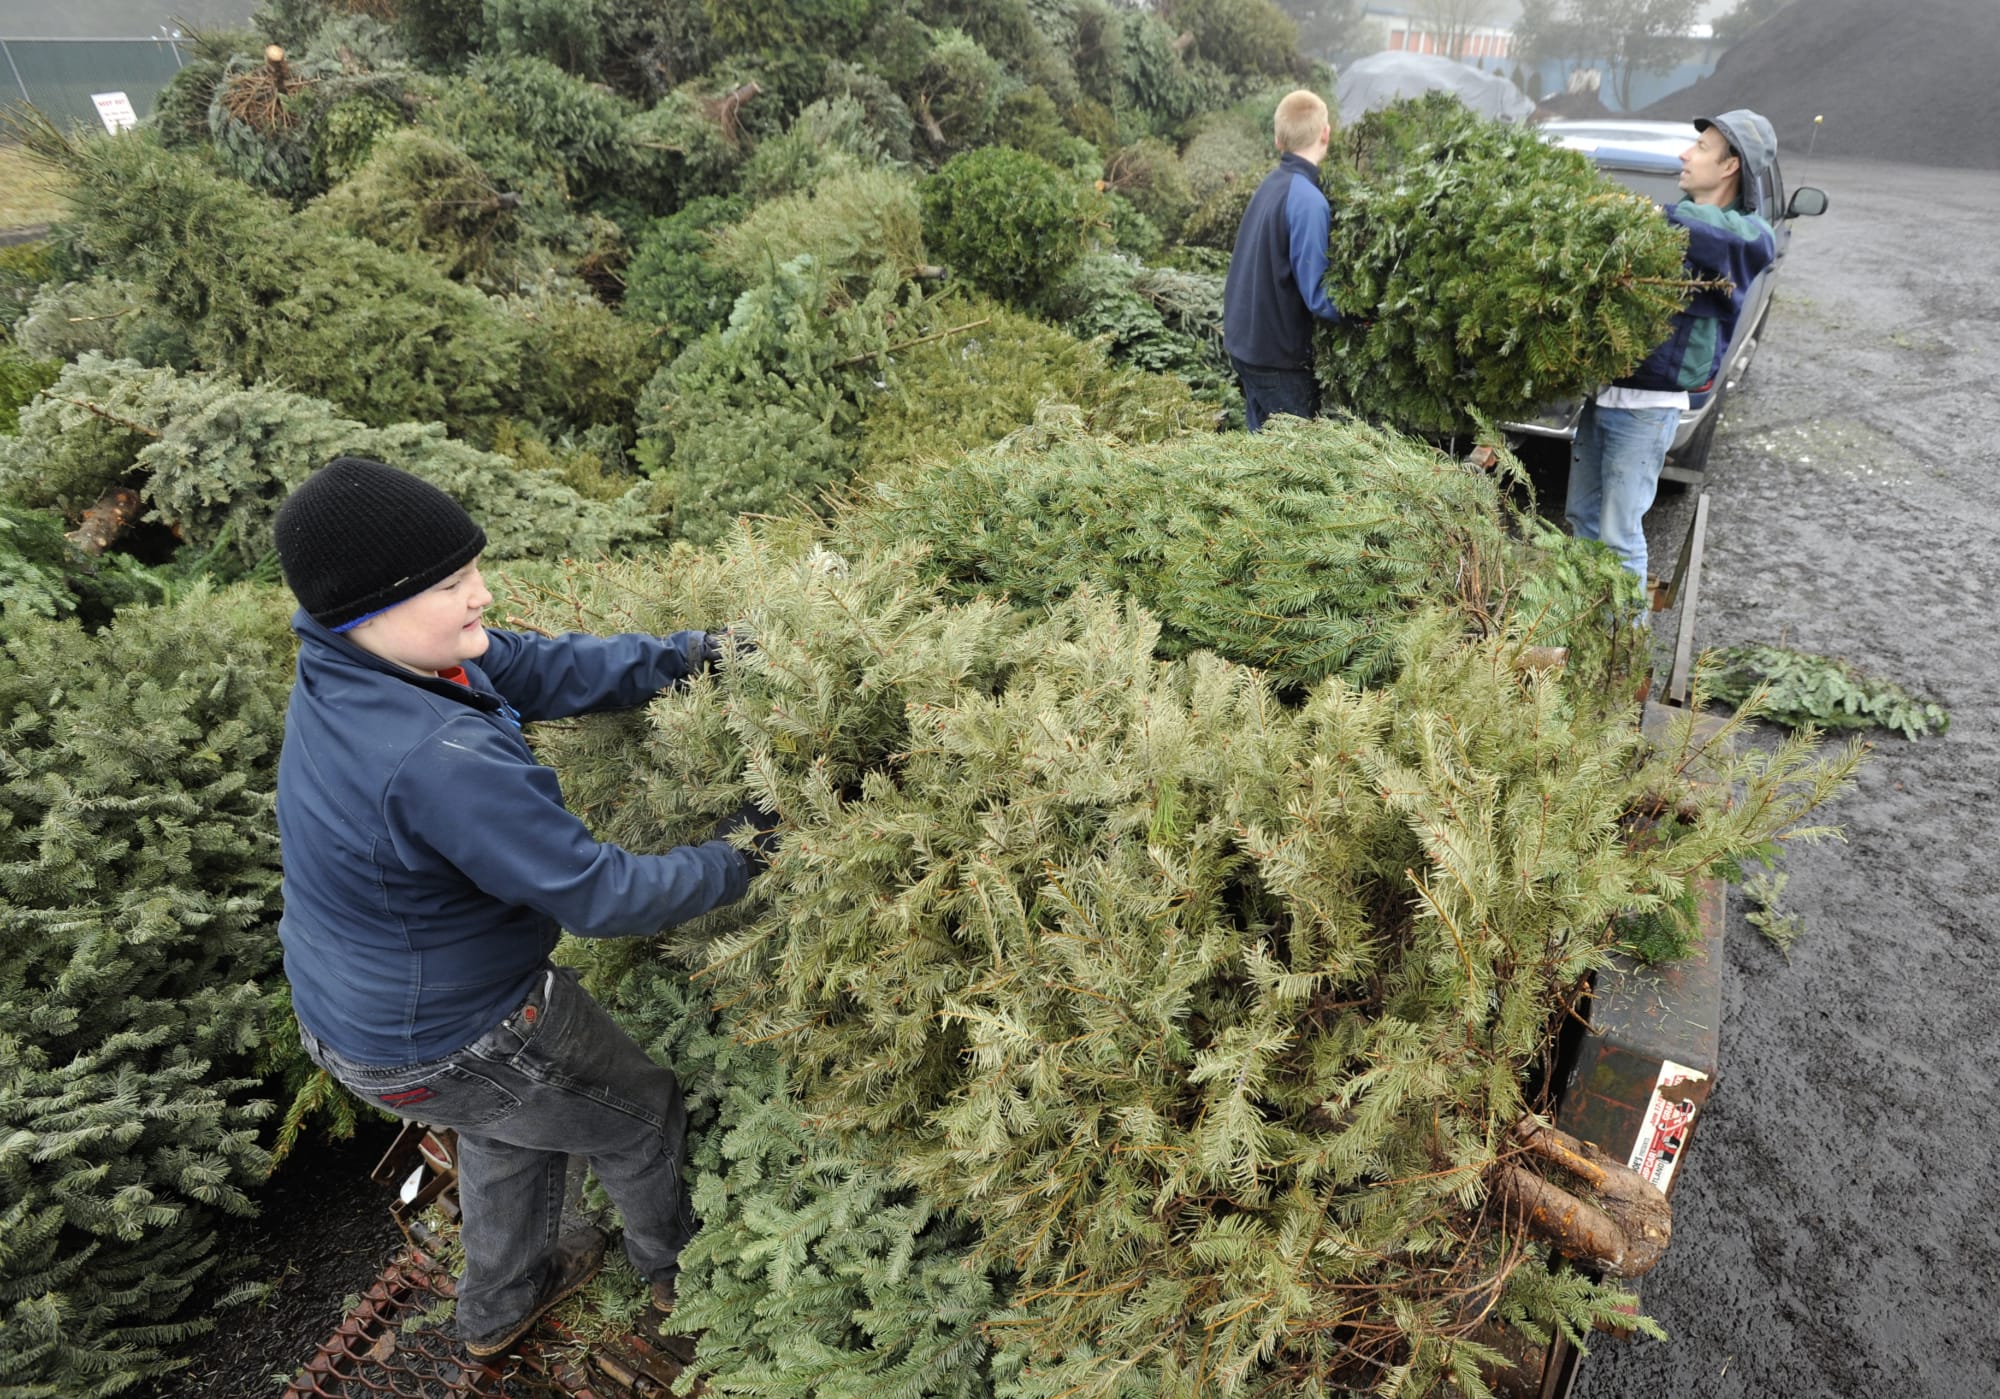 The Boy Scouts will hold their annual Christmas tree recycling event on Saturday.